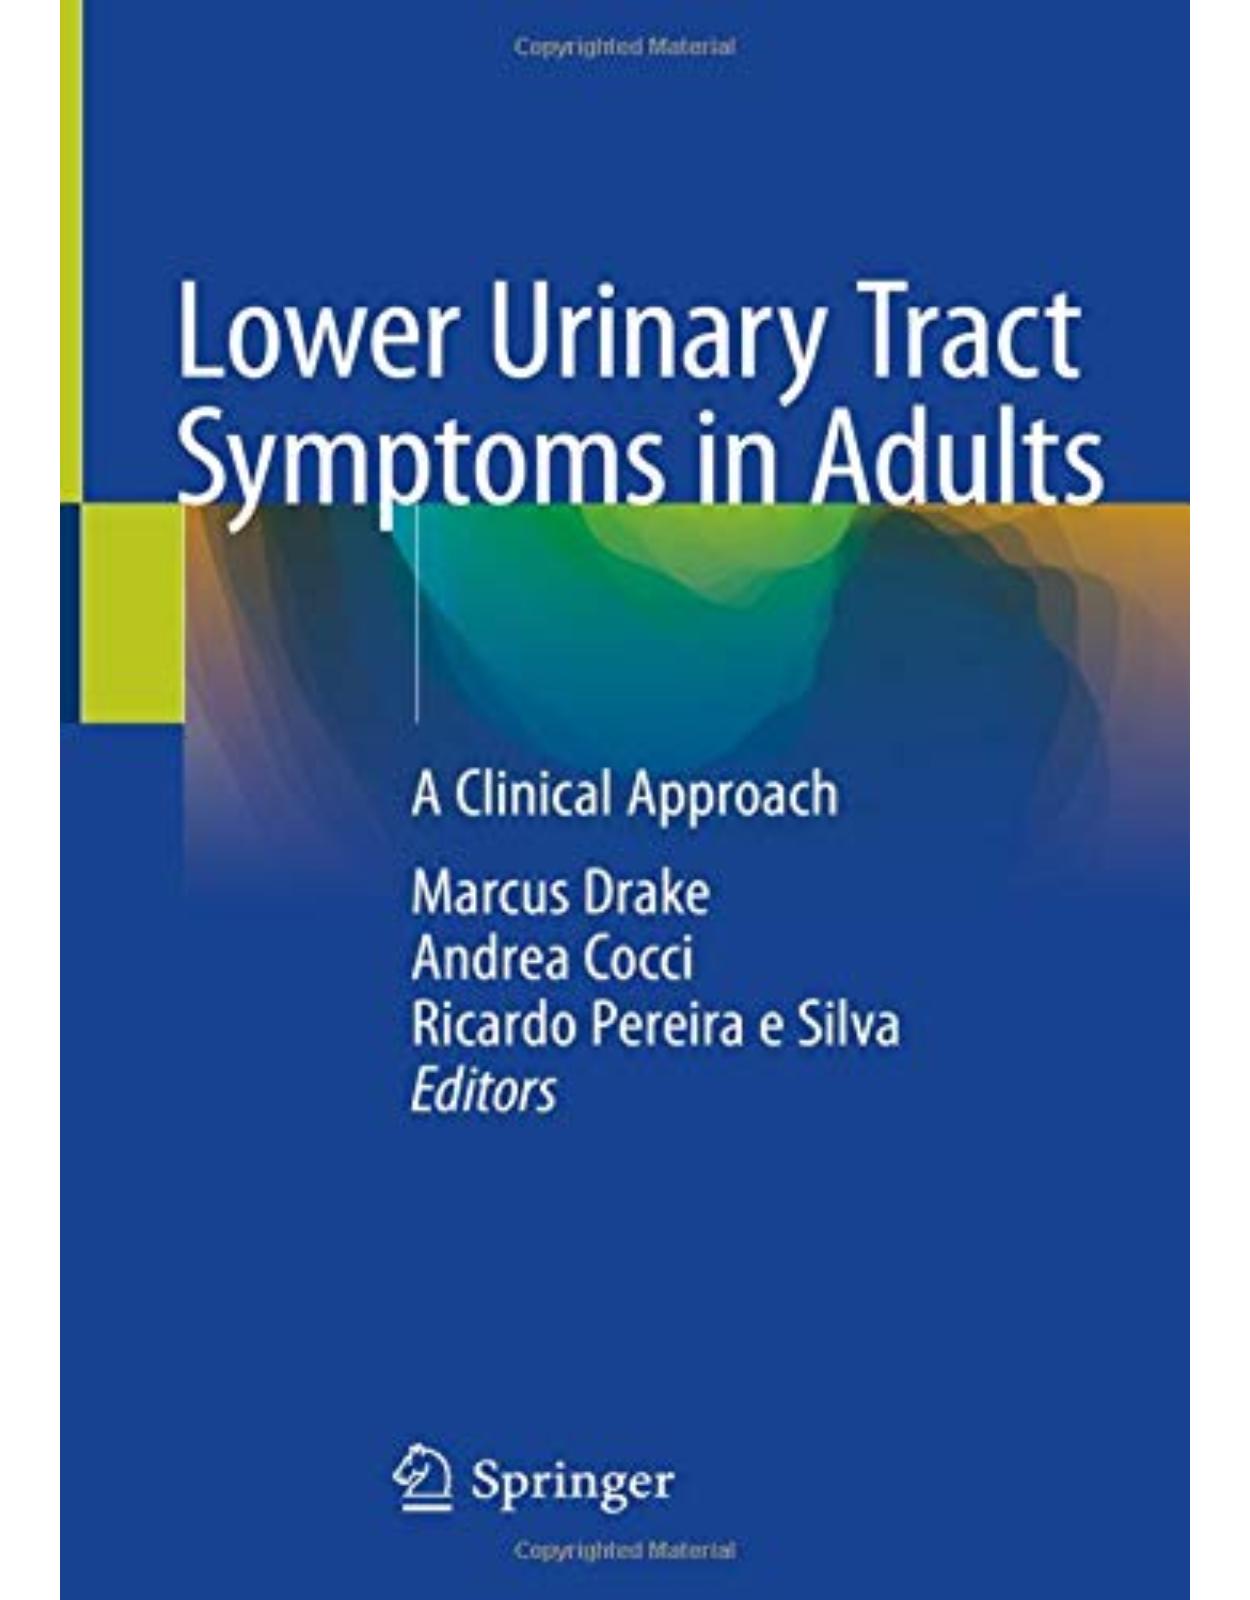 Lower Urinary Tract Symptoms in Adults: A Clinical Approach